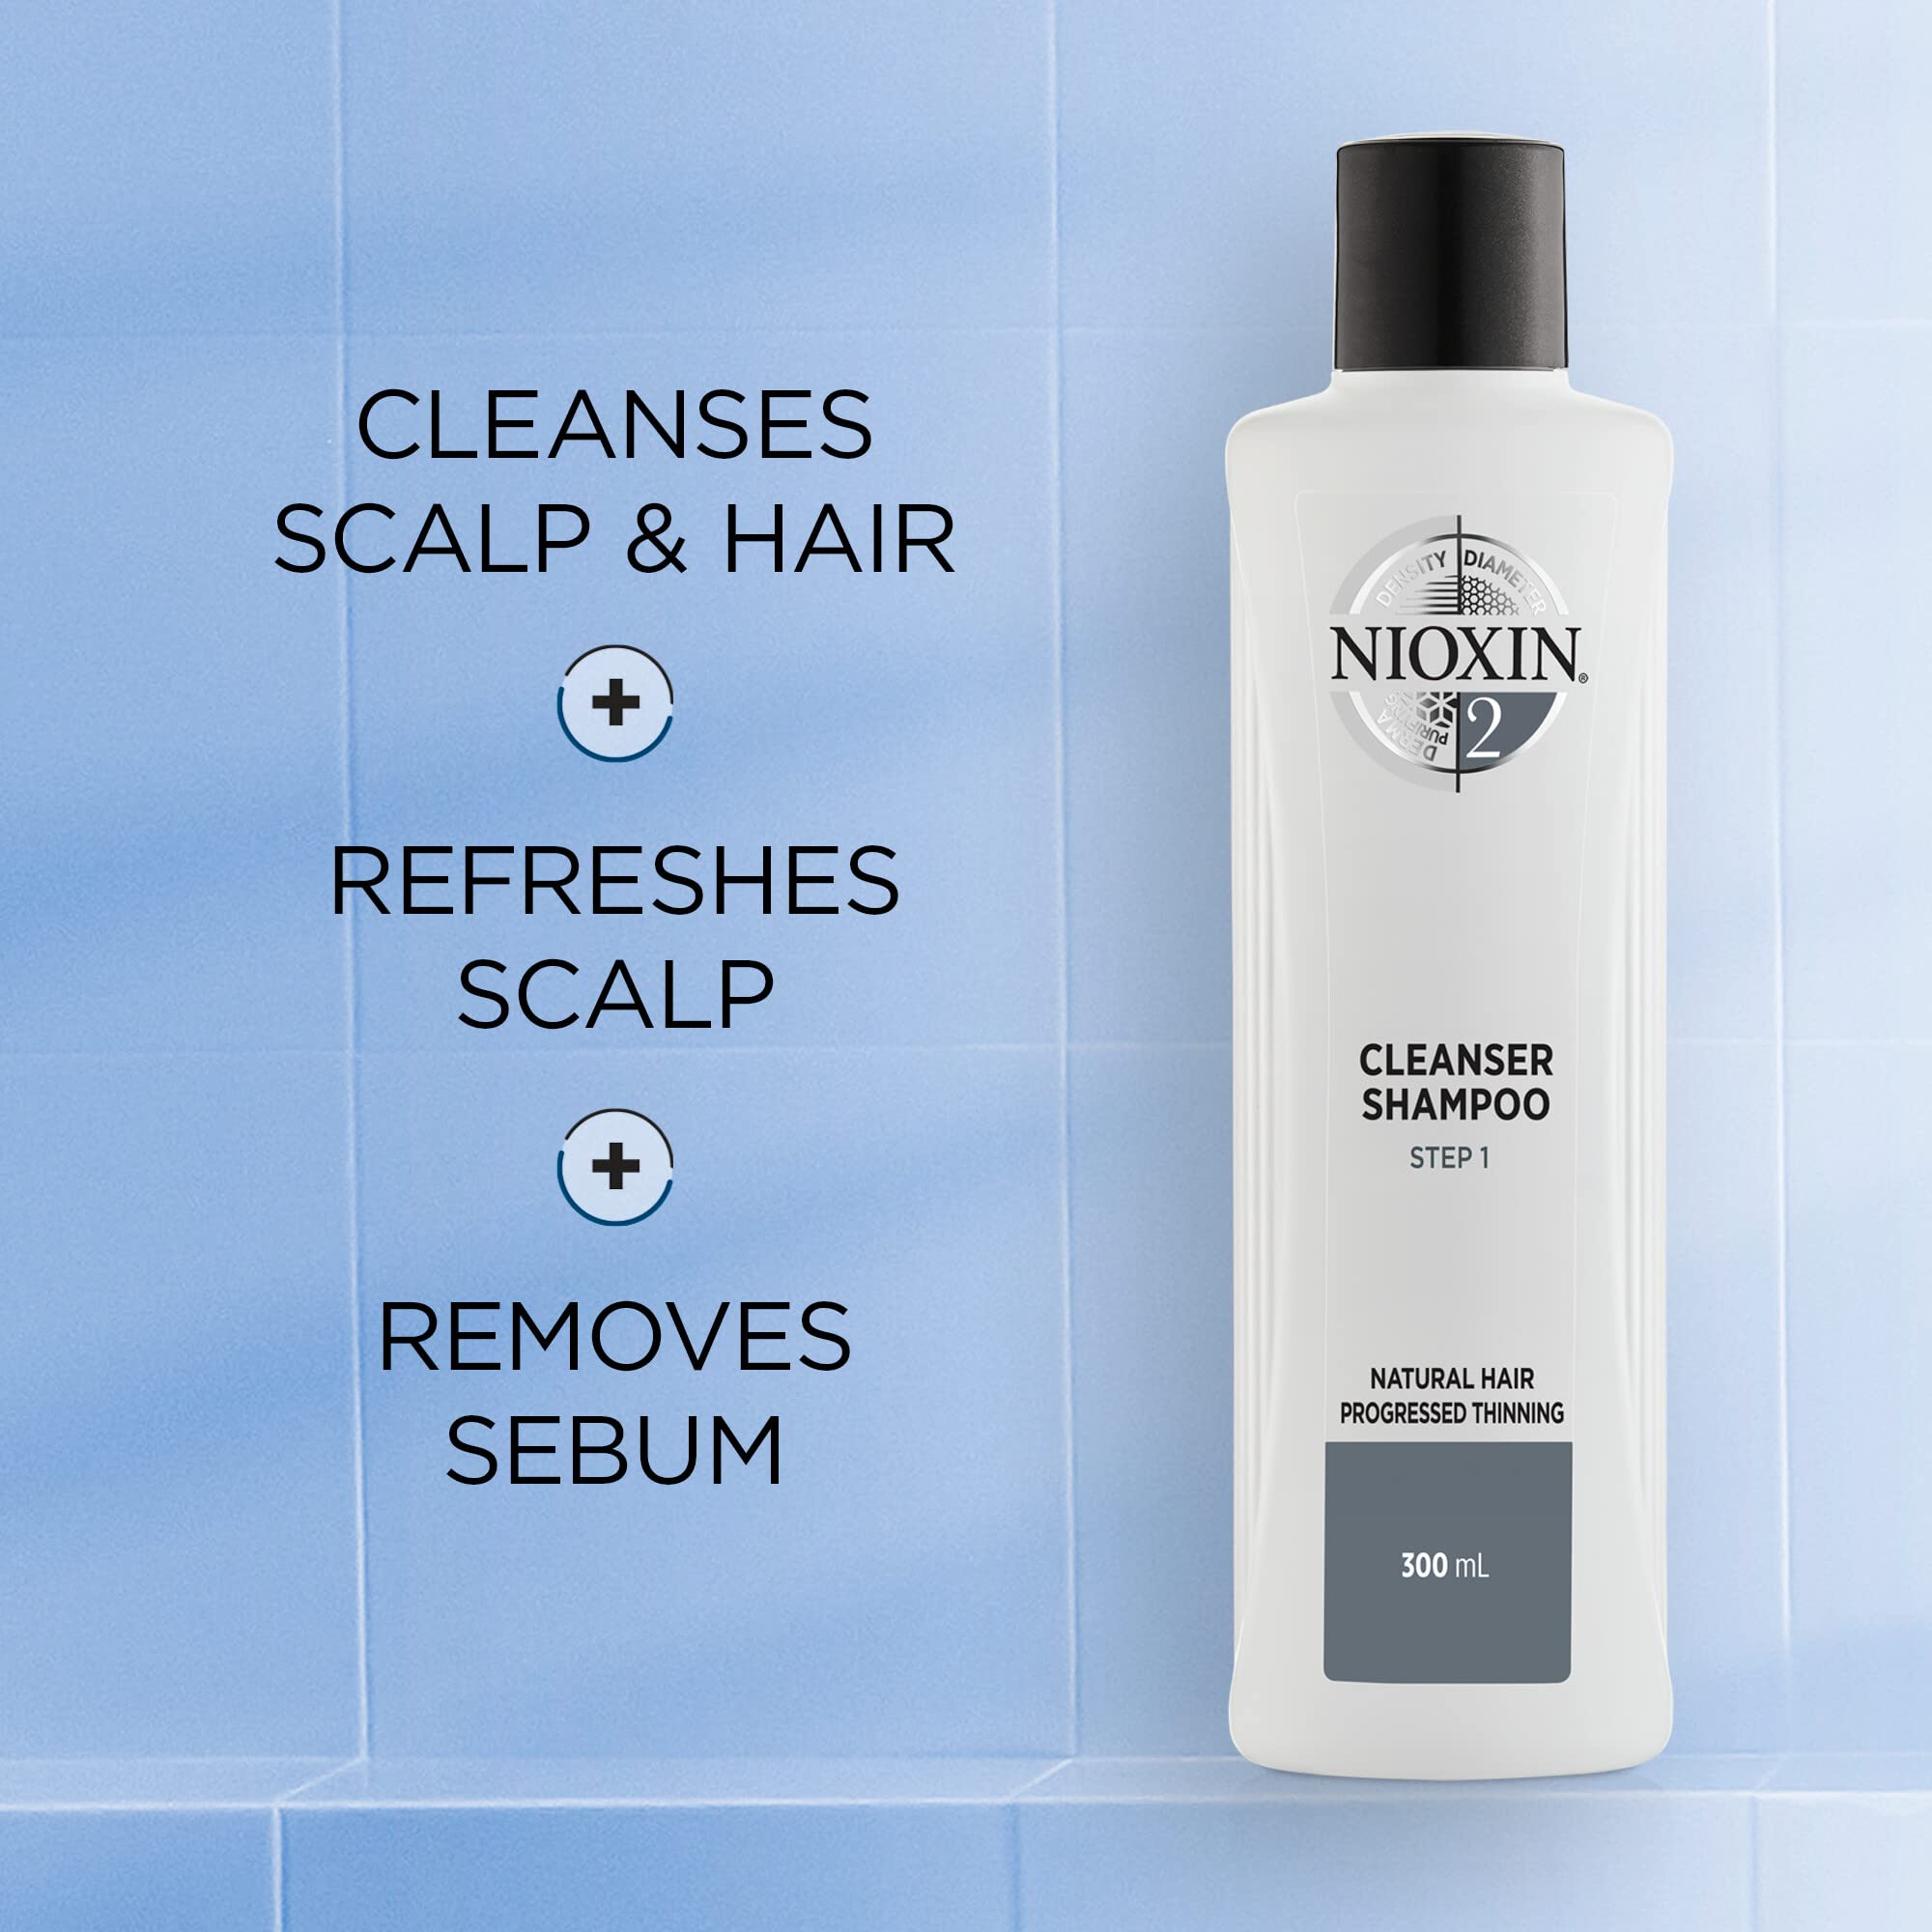 Nioxin System 2 Shampoo & Conditioner Prepack, Natural Treated Hair with Progressed Thinning, Pumps Included, 33.8 fl oz